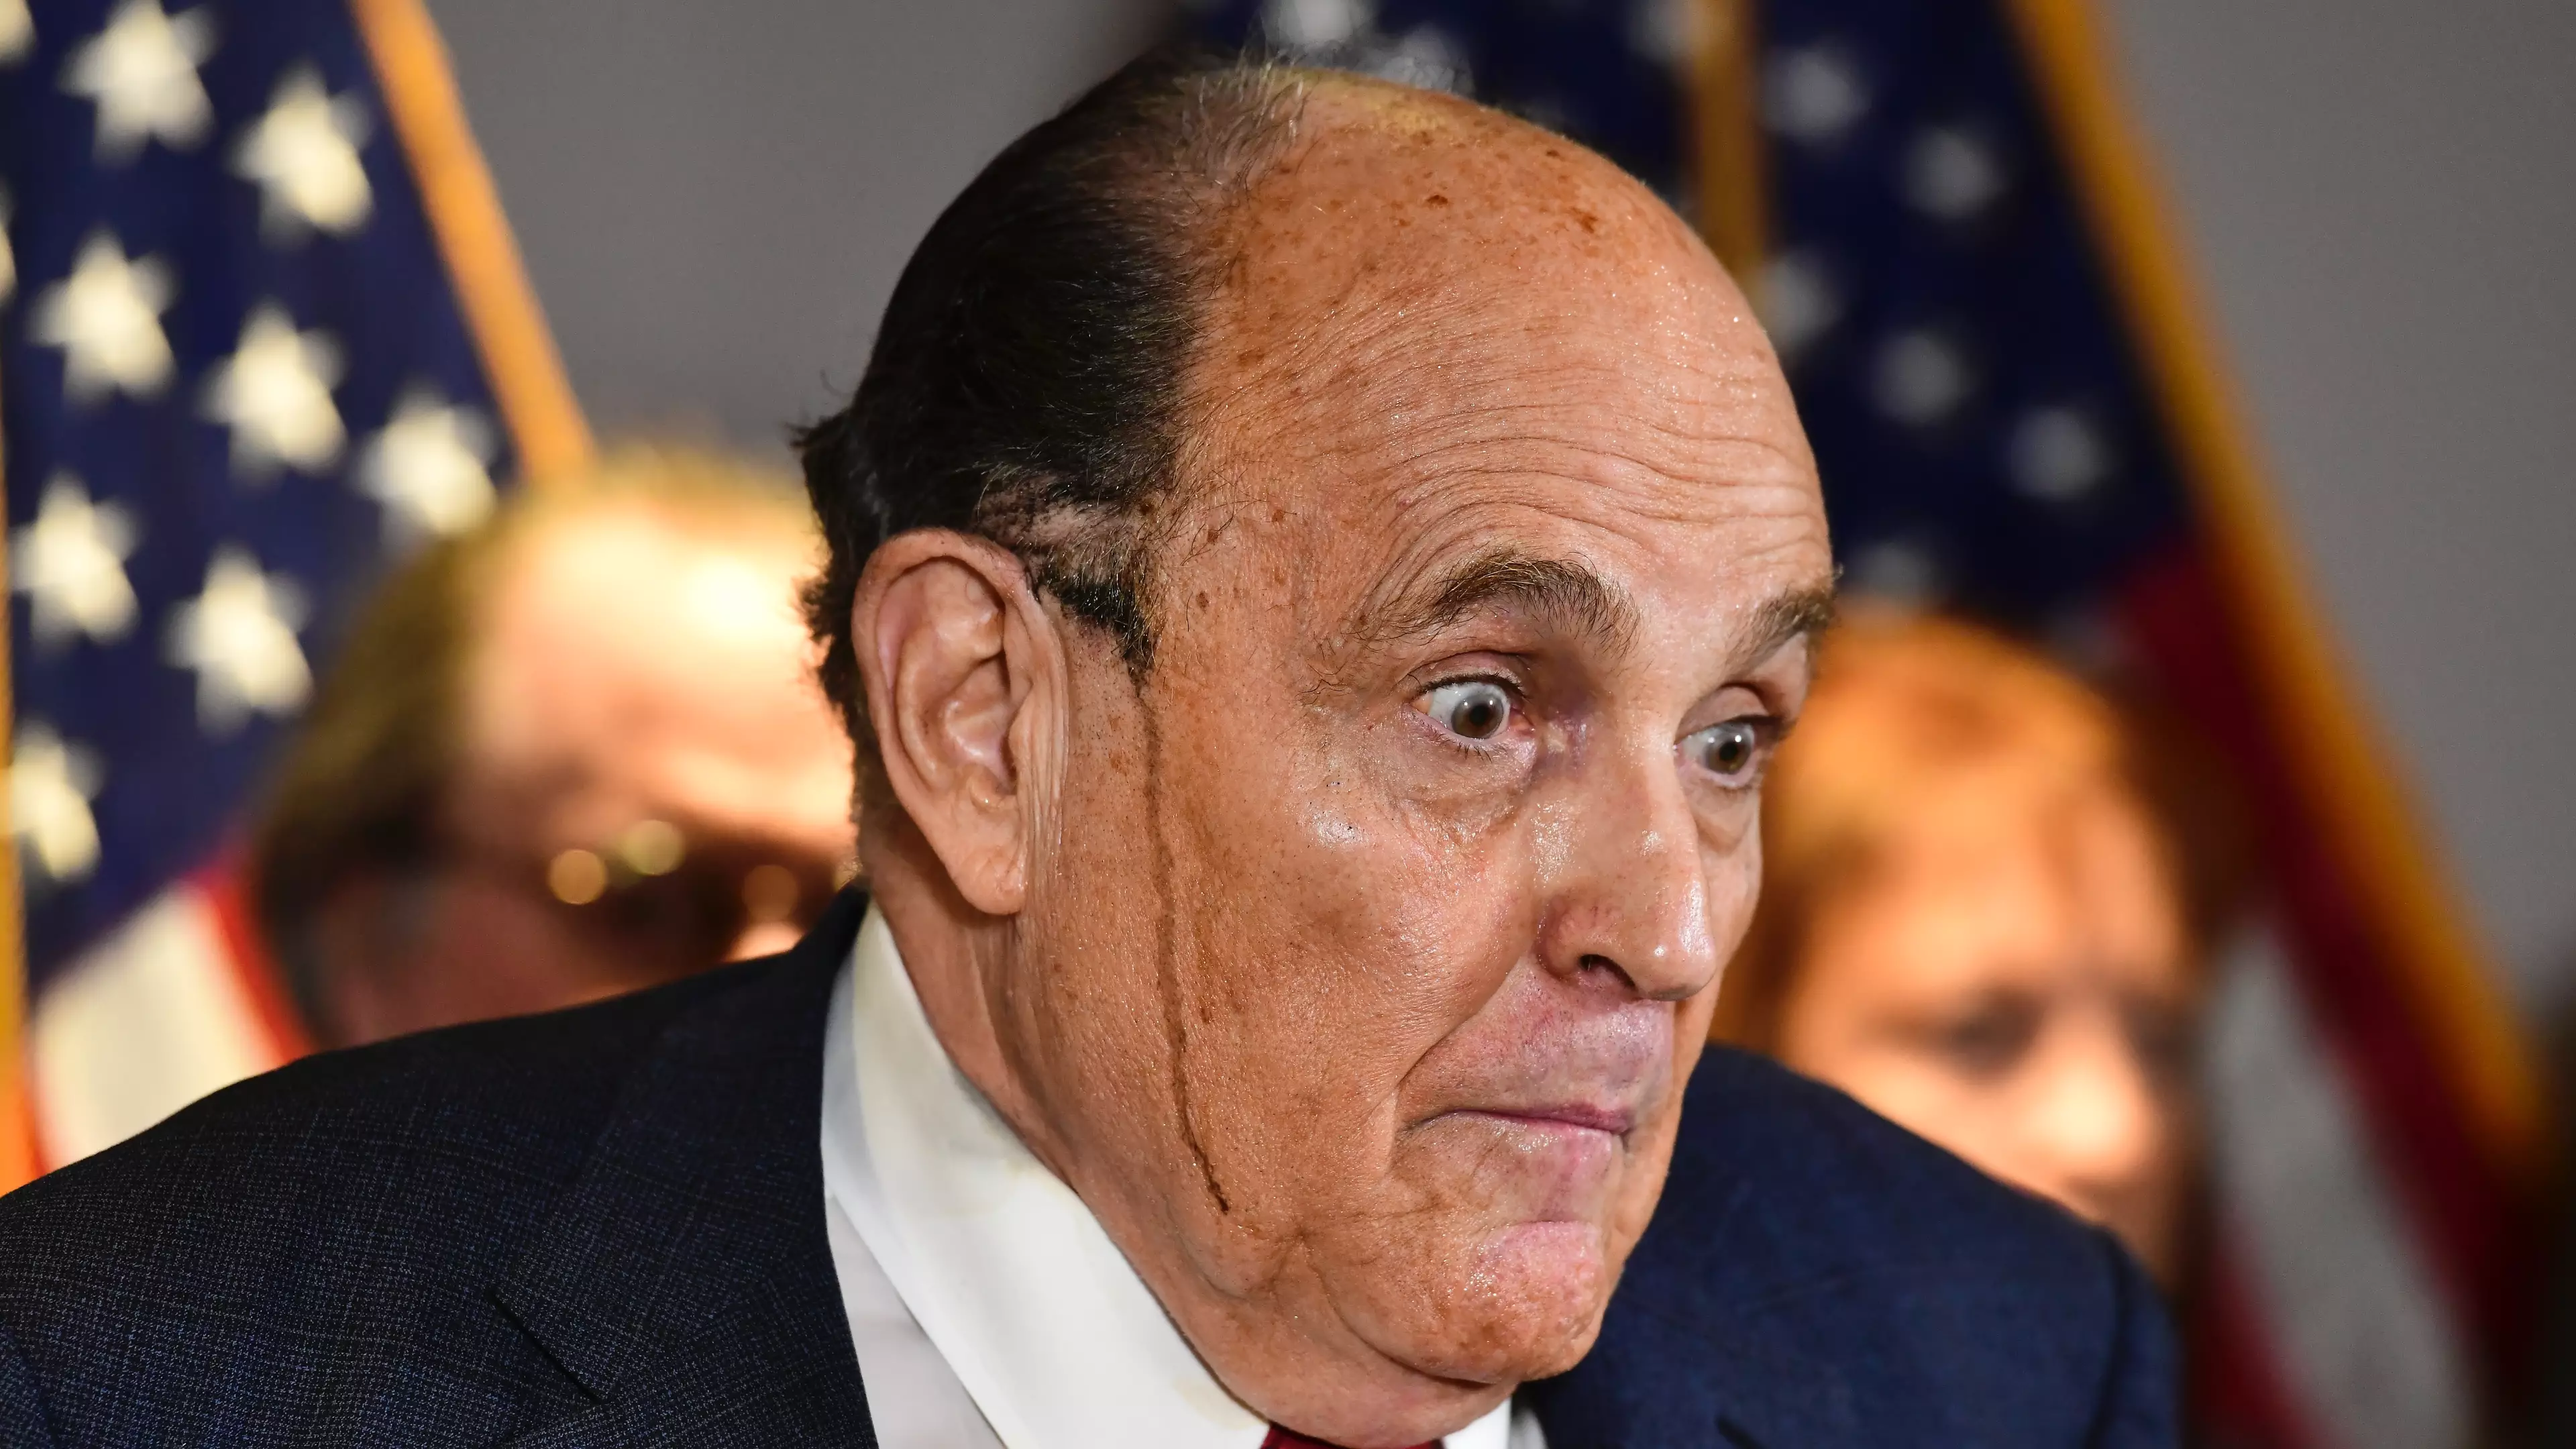 Rudy Giuliani Sweats Out Hair Dye During Wild Press Conference